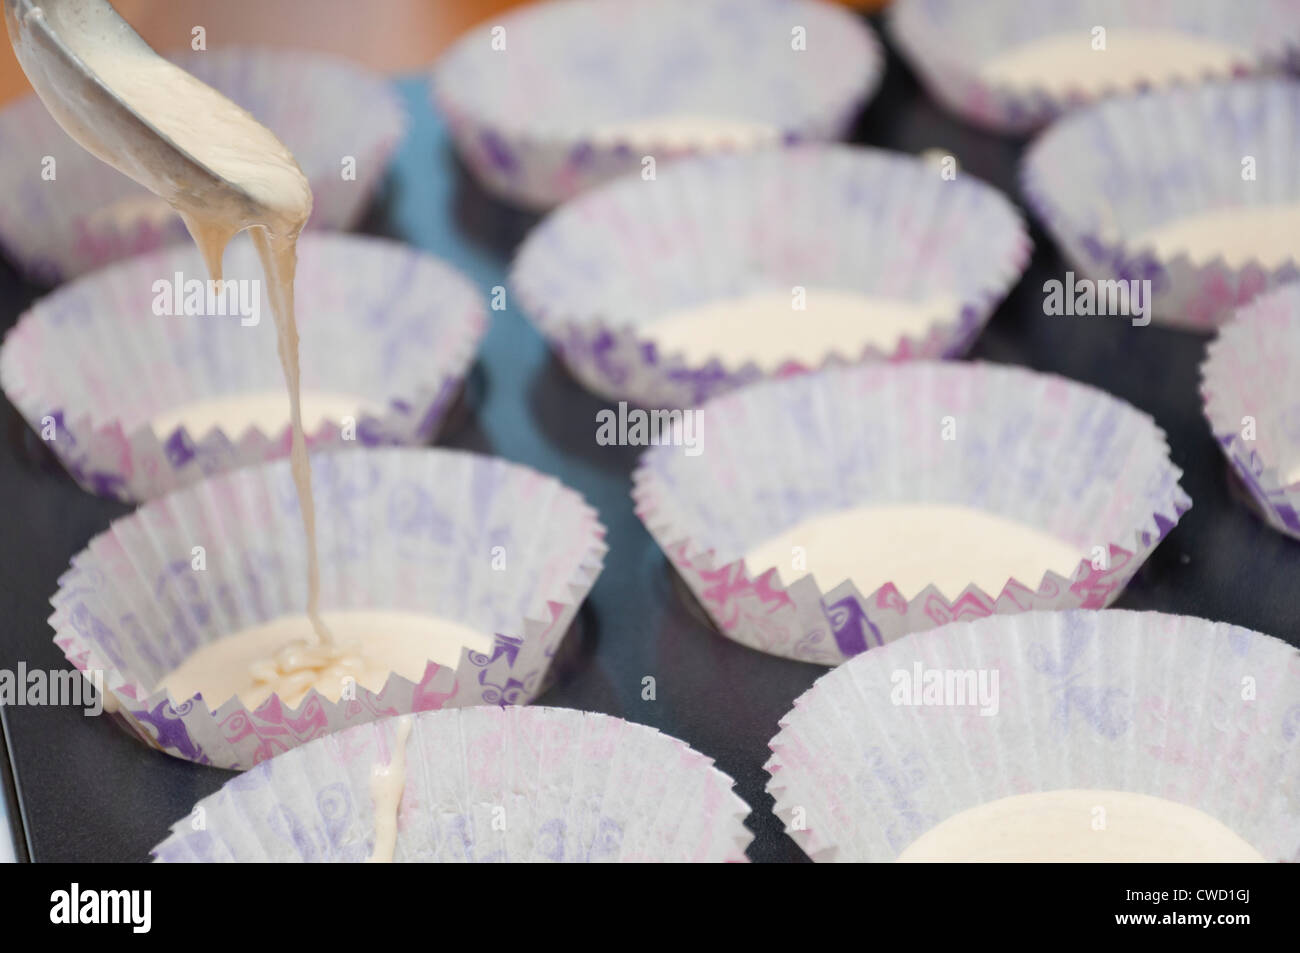 Pouring cake mix into cup cake cases to bake fairy cakes. Stock Photo